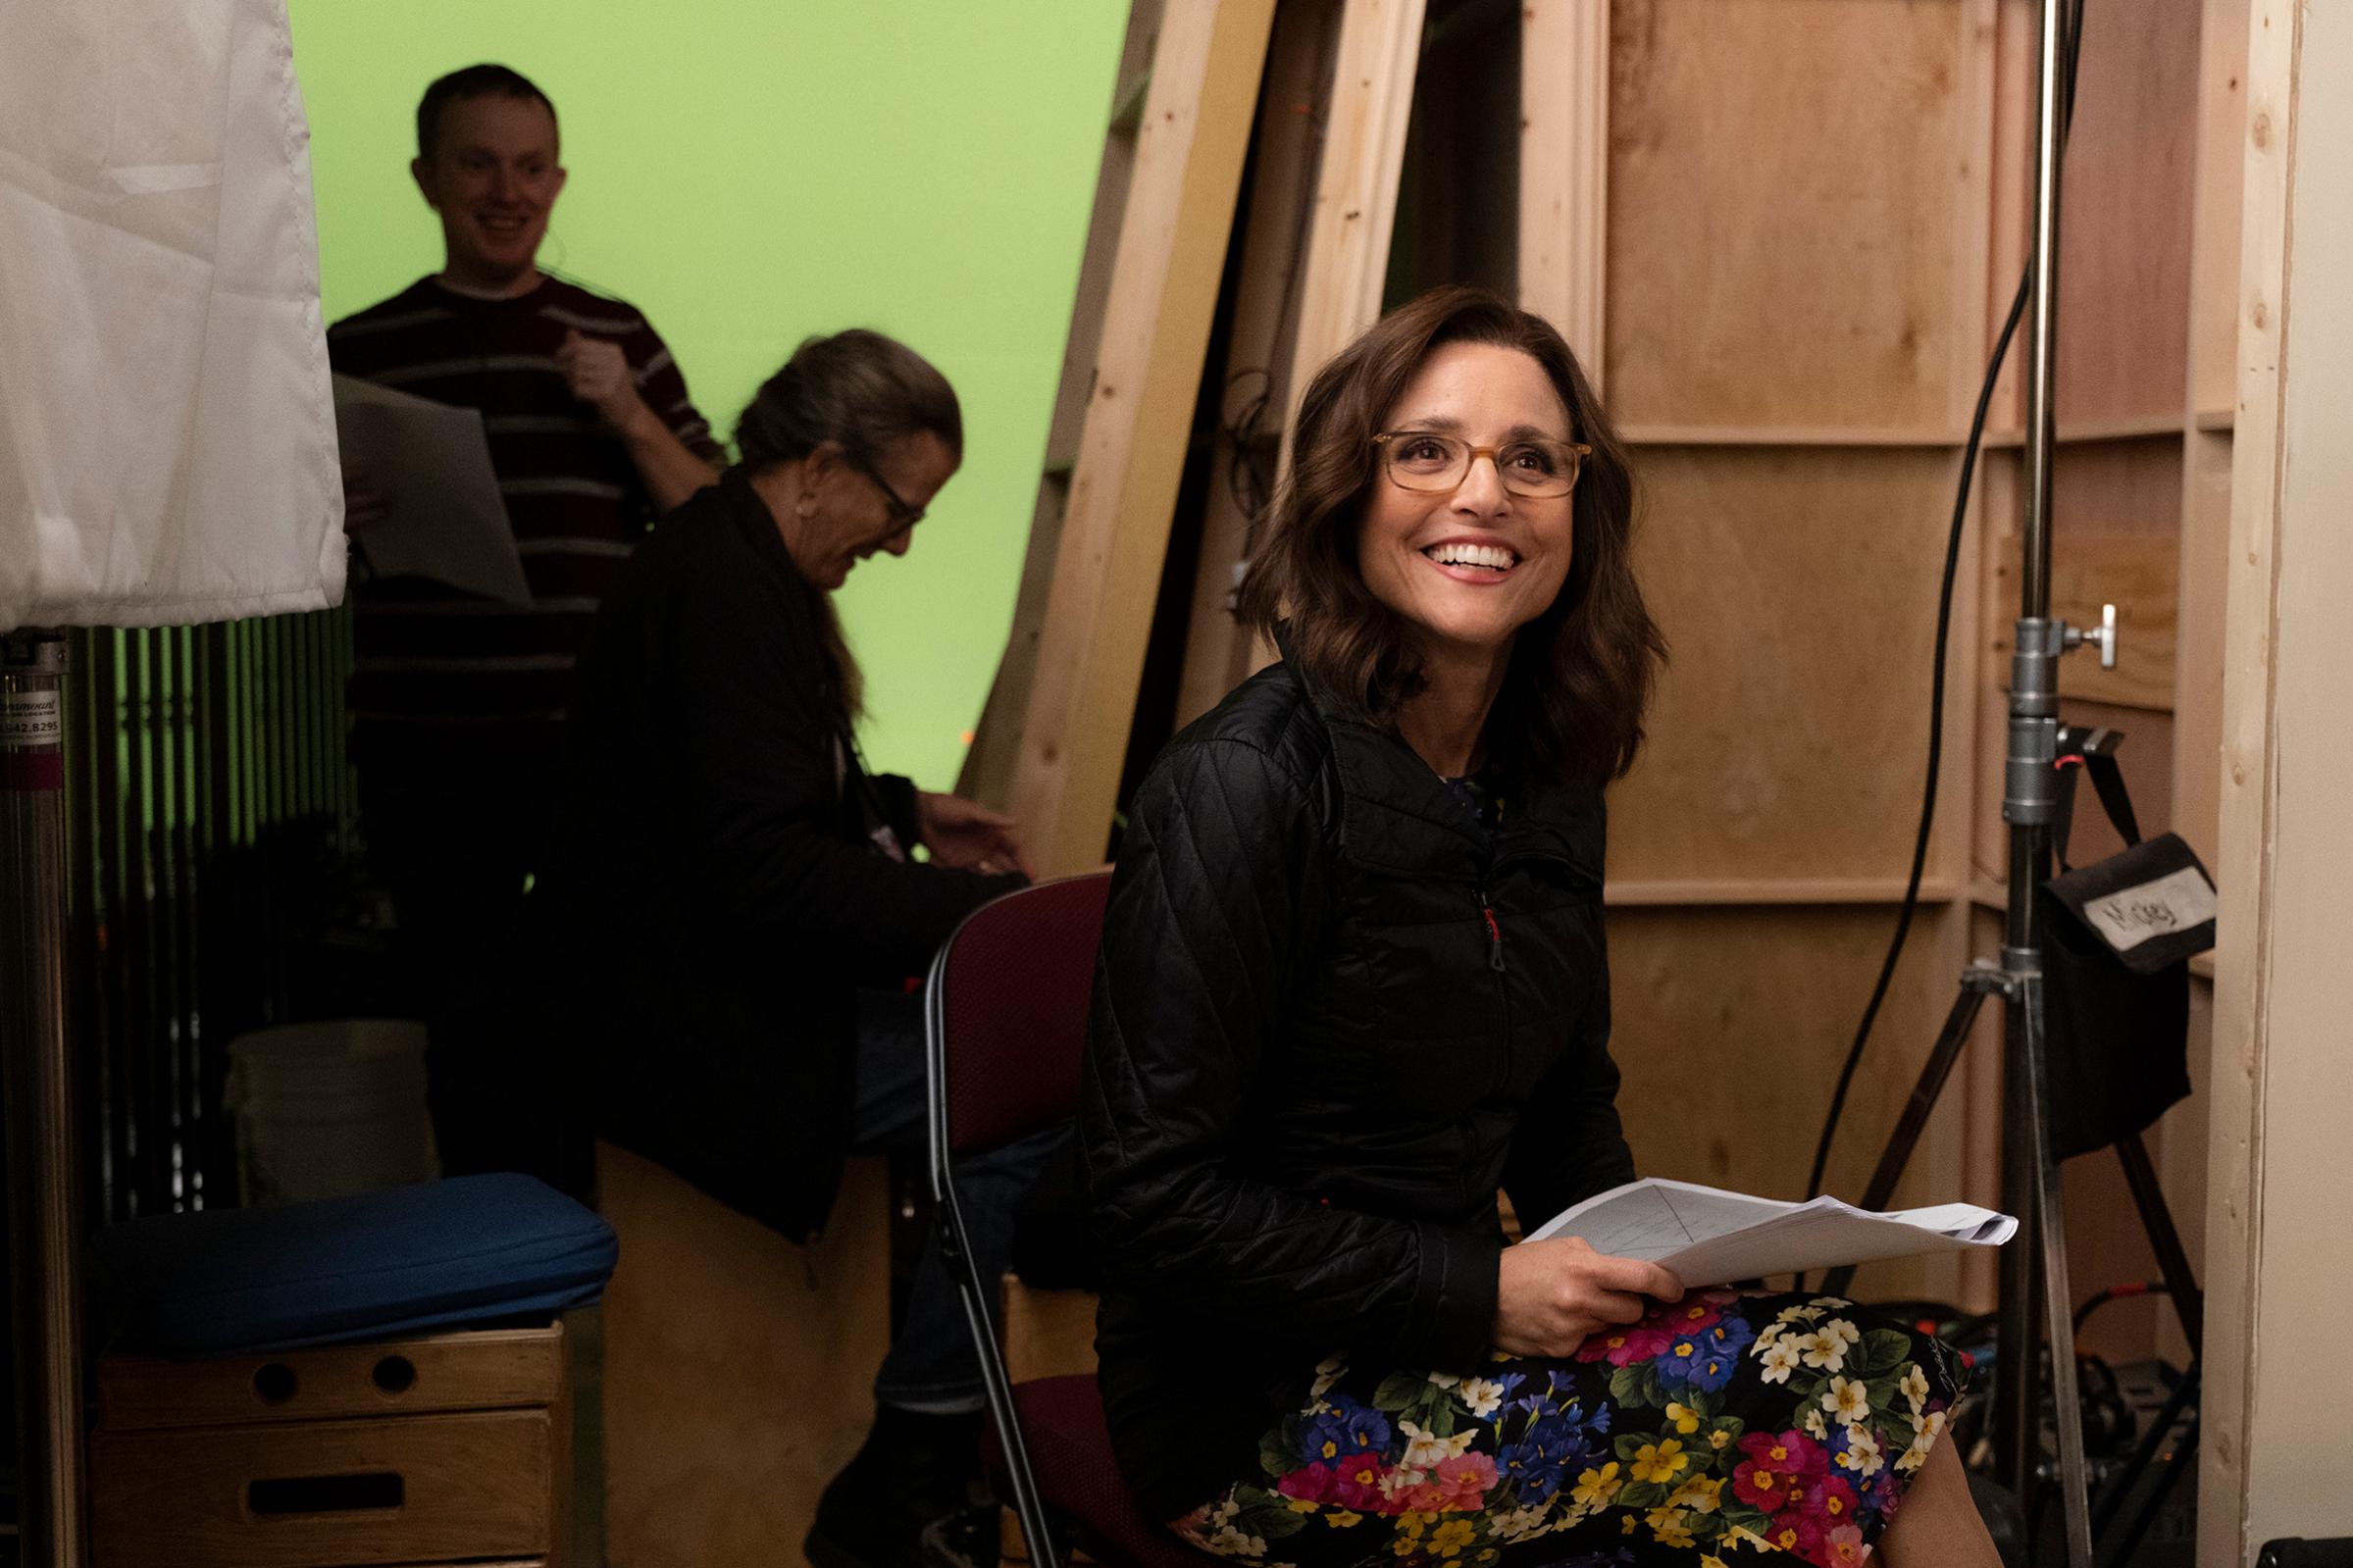 Behind the scenes on the set of Veep